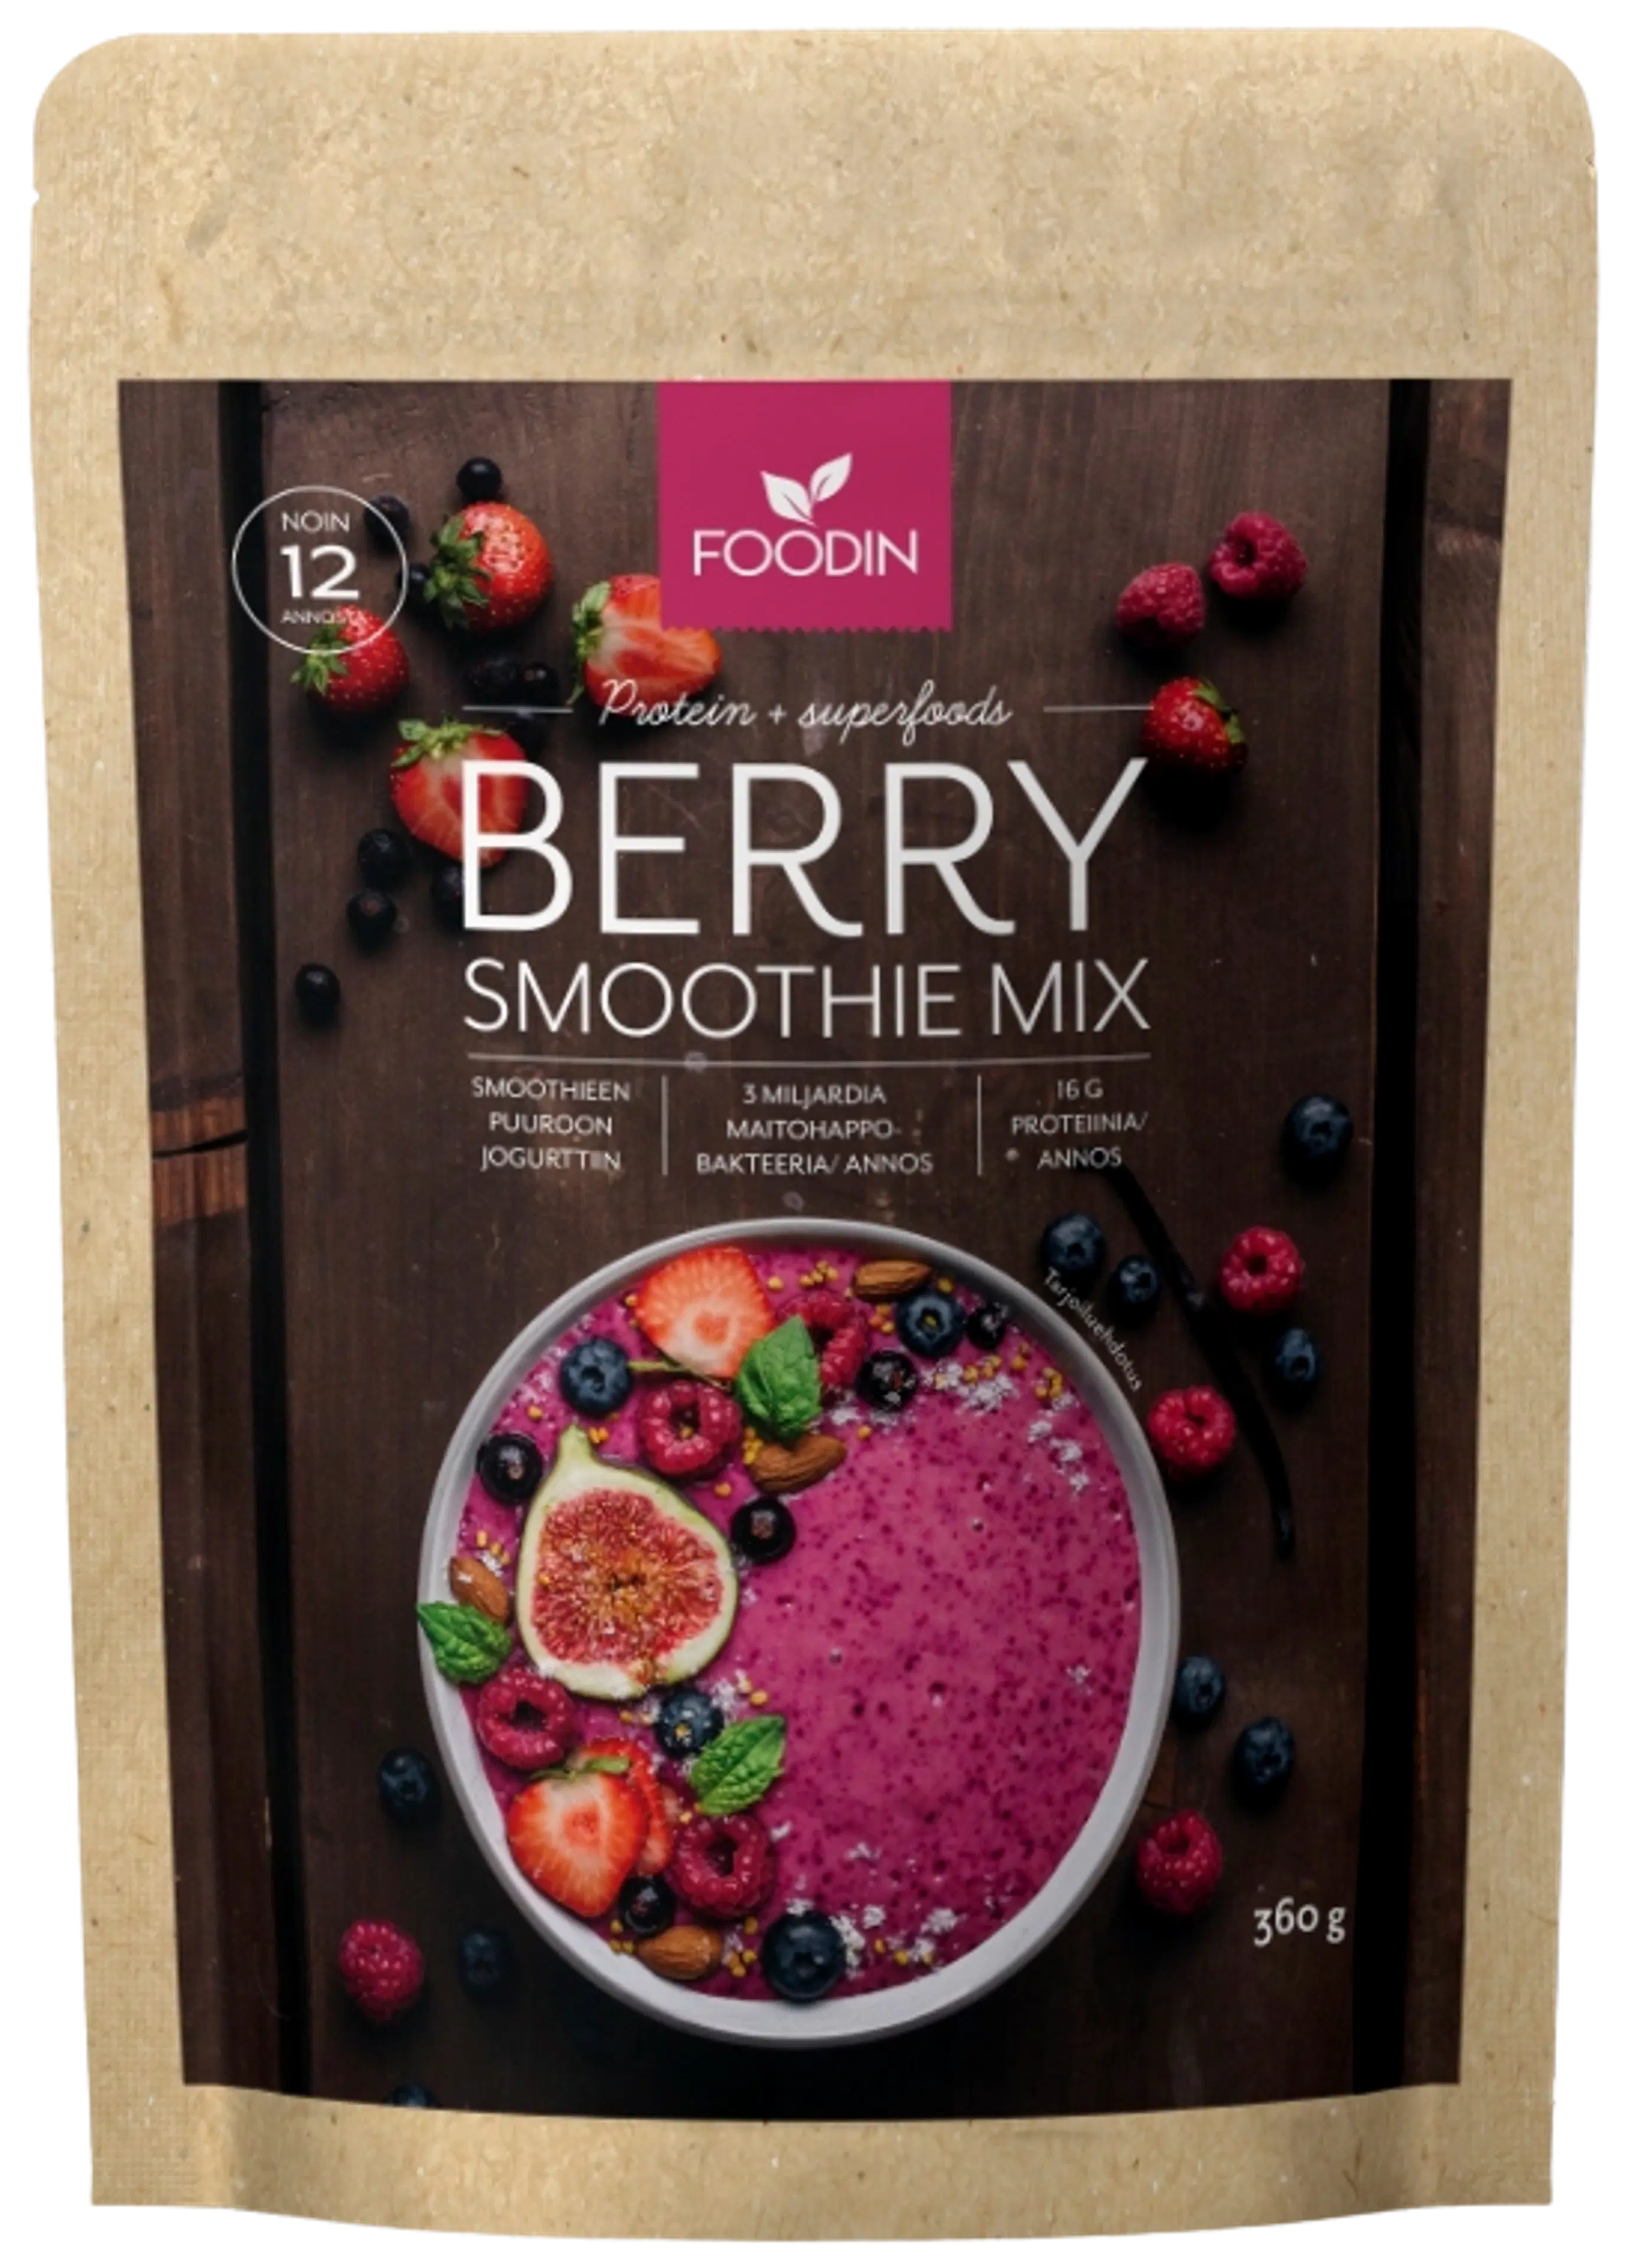 Foodin Smoothie mix Berry 360g